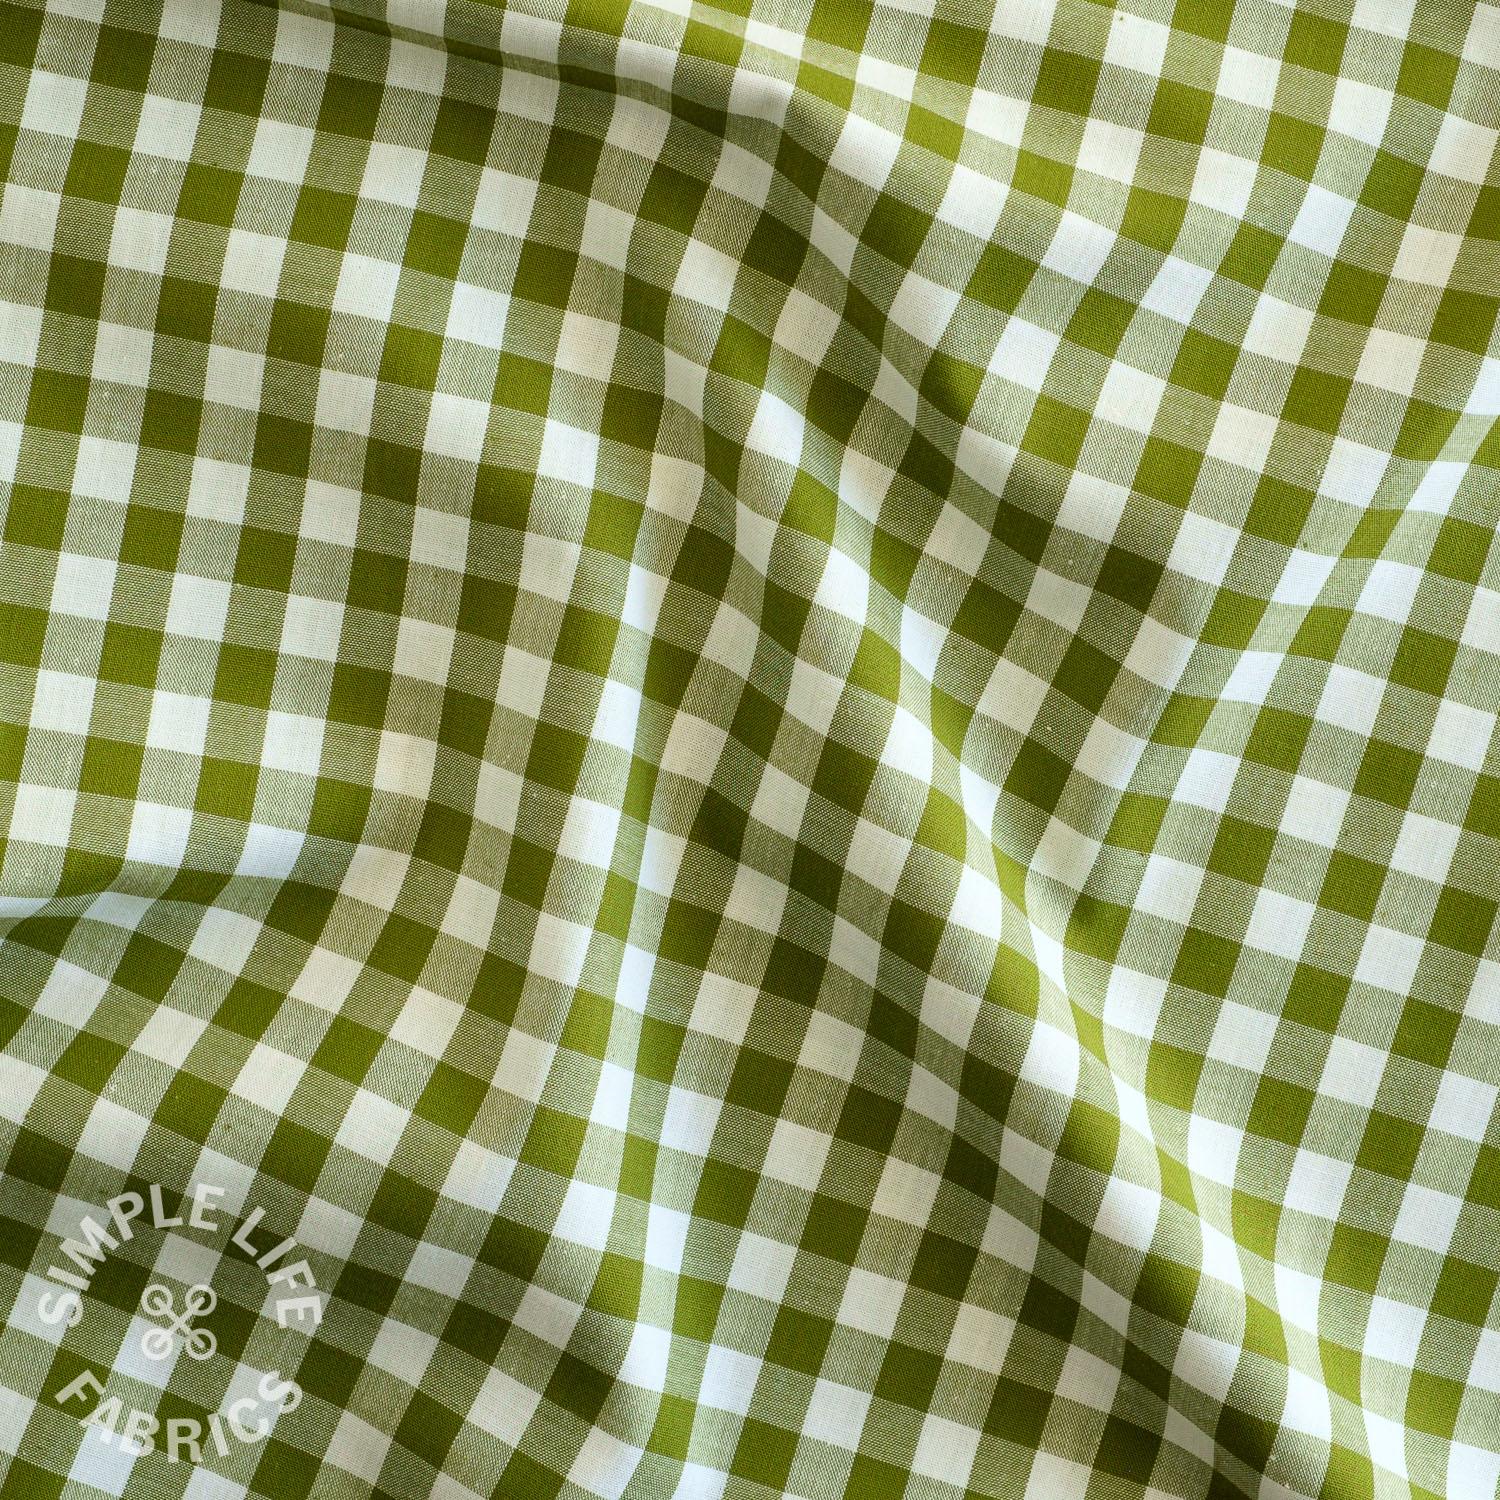 Gingham fabric with green checks